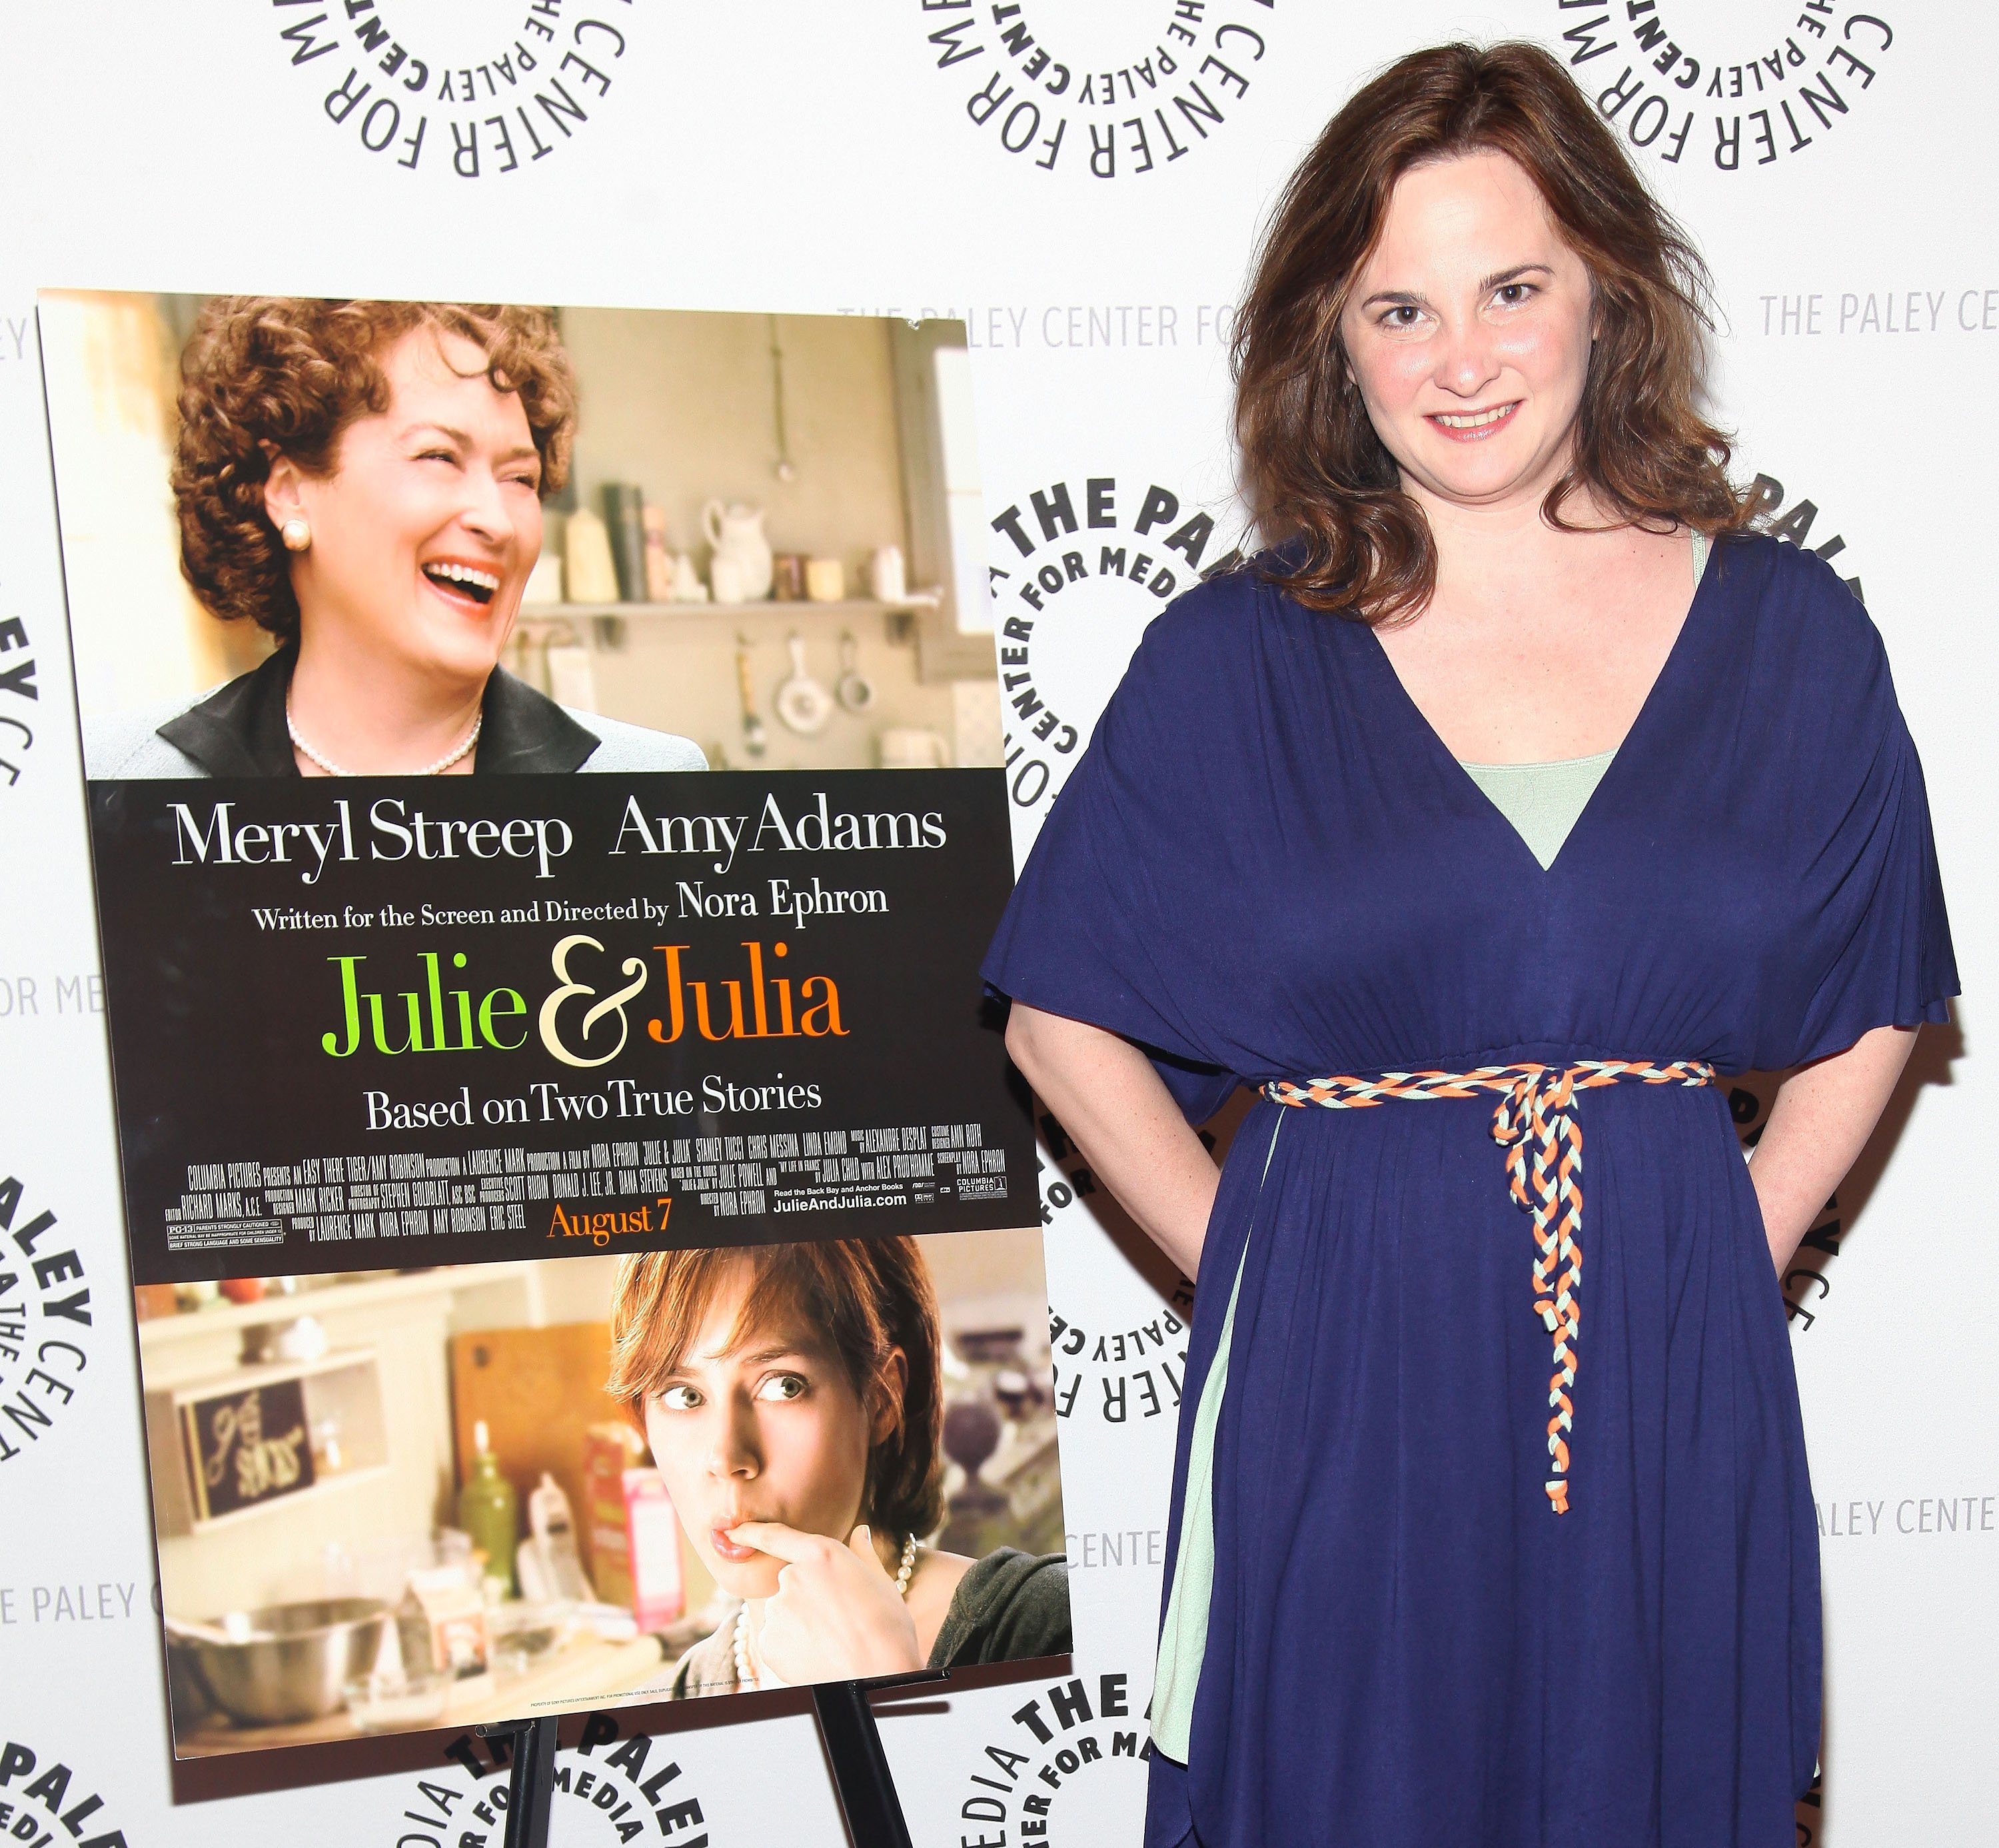 ulie Powell attends a screening of "Julie and Julia" at the Paley Center For Media on August 4, 2009 in New York City | Source: Getty Images 